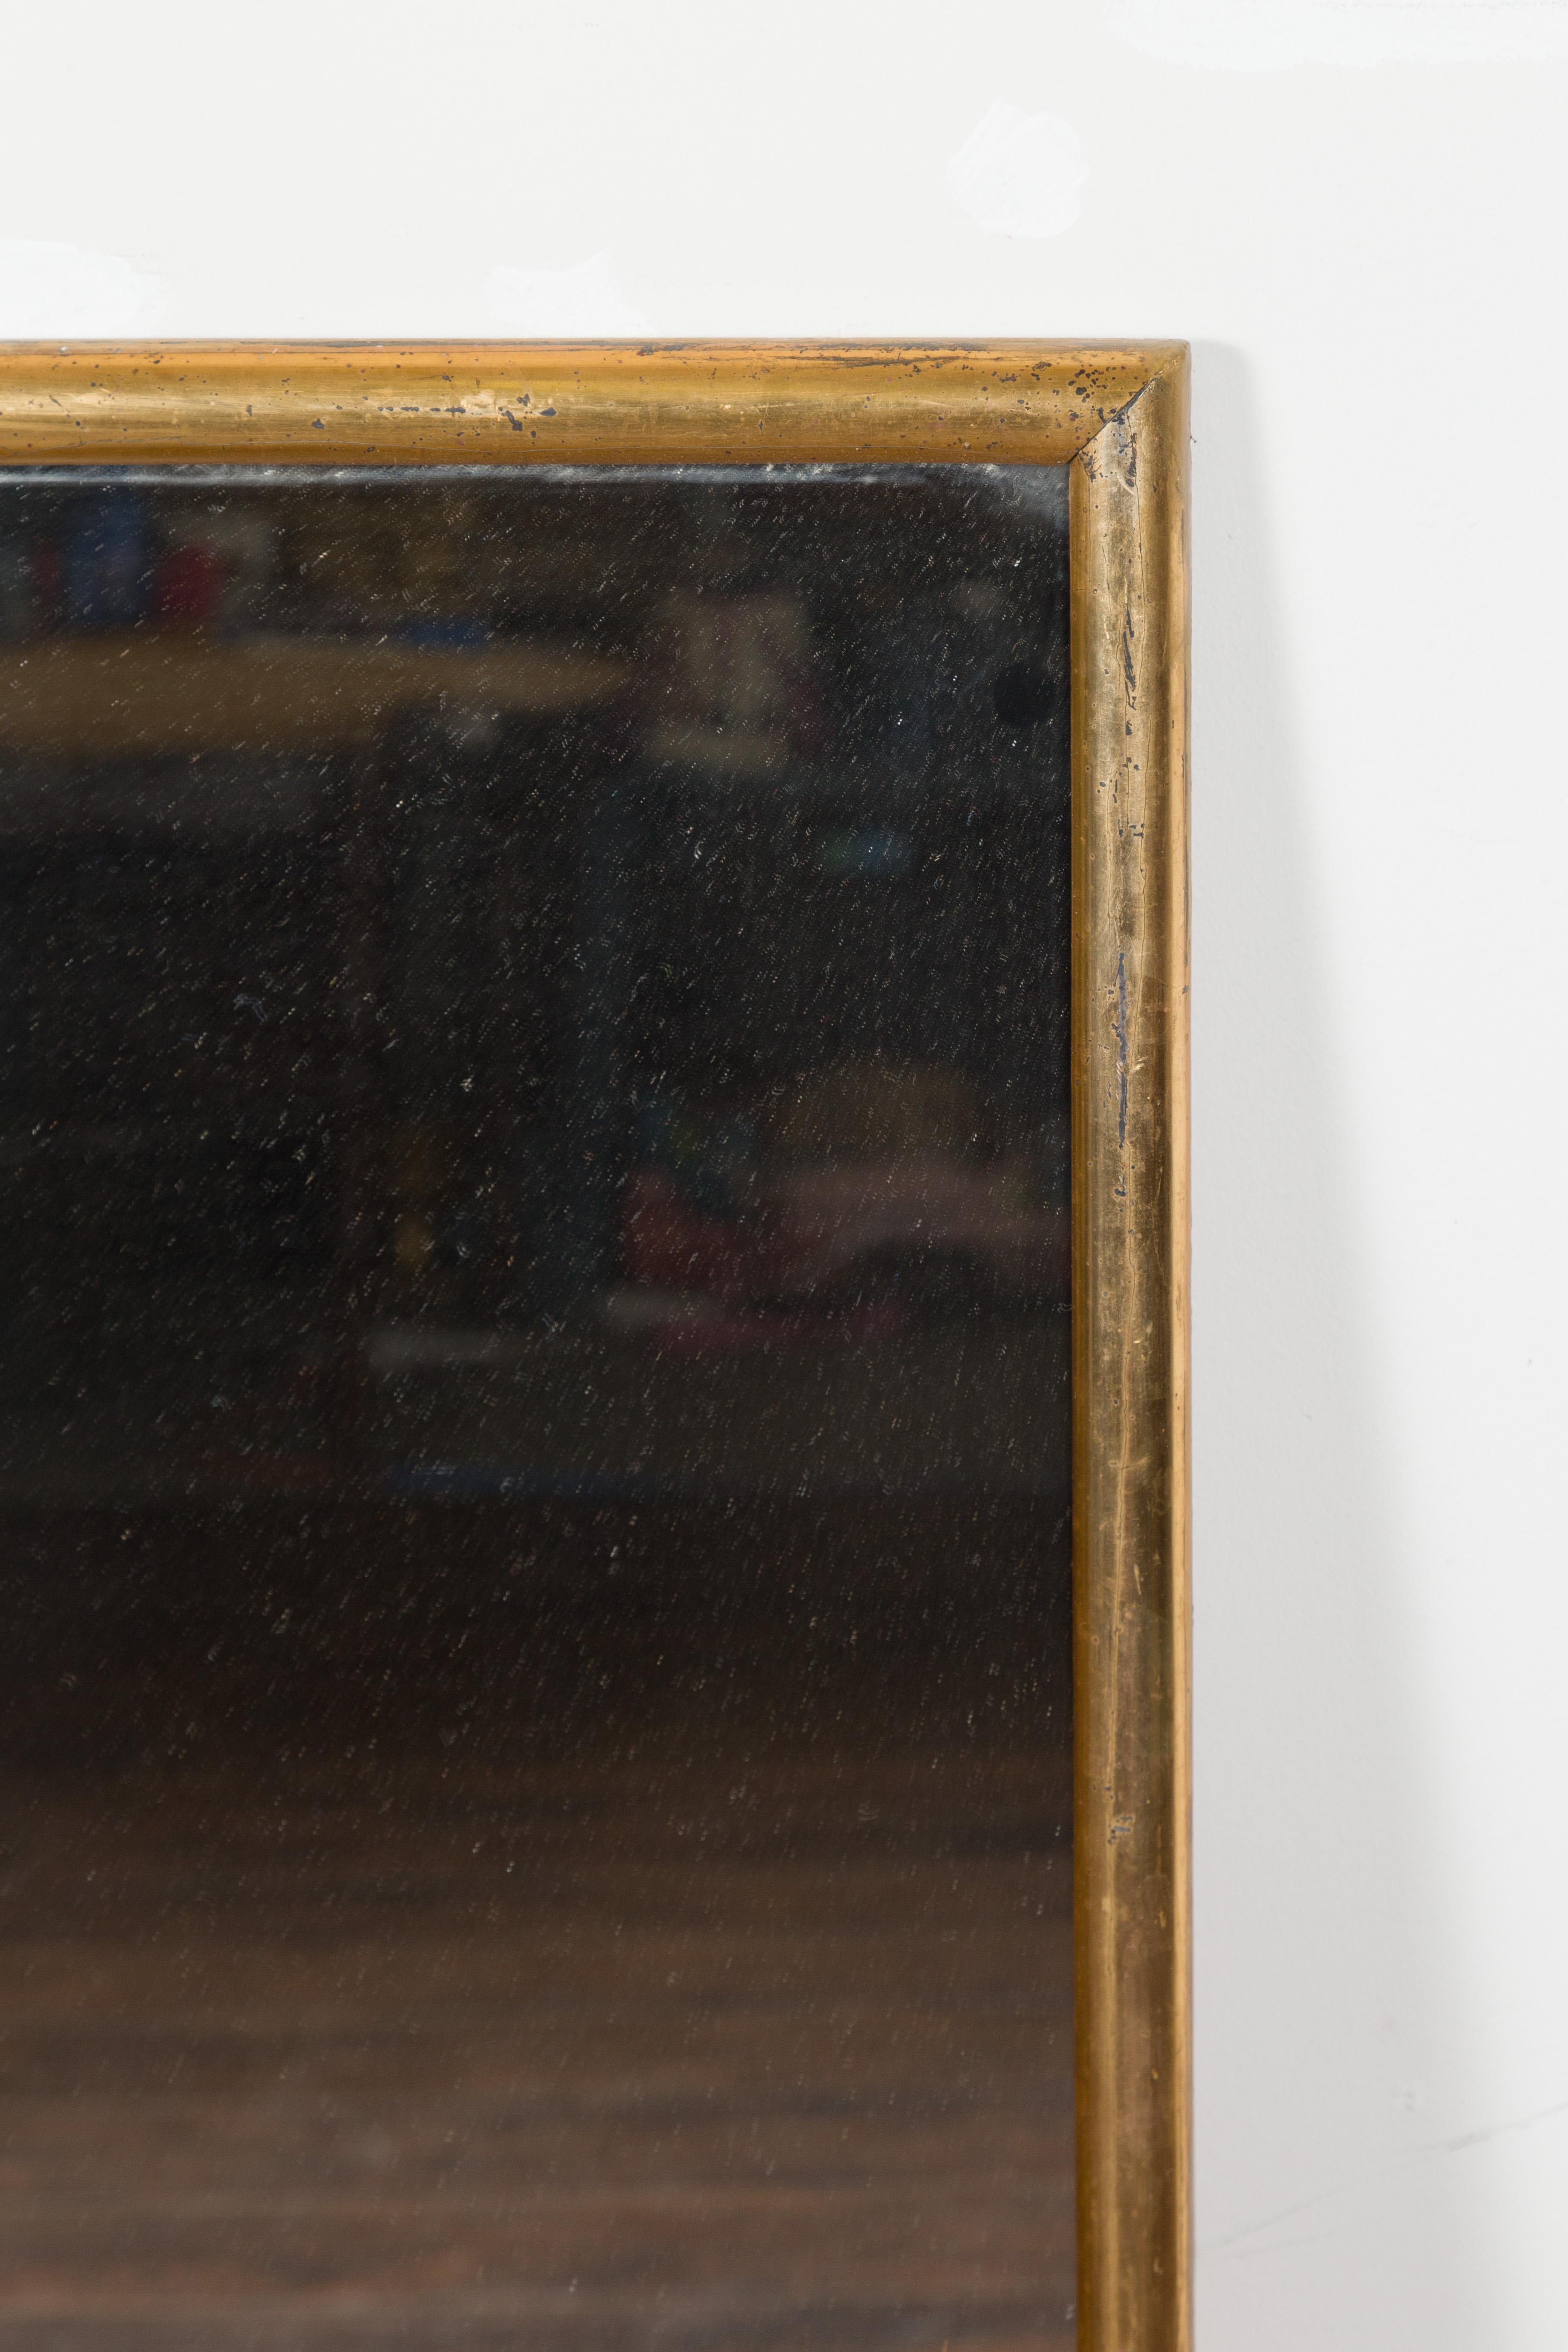 French 1920s Giltwood Rectangular Mirror with Distressed Patina For Sale 8